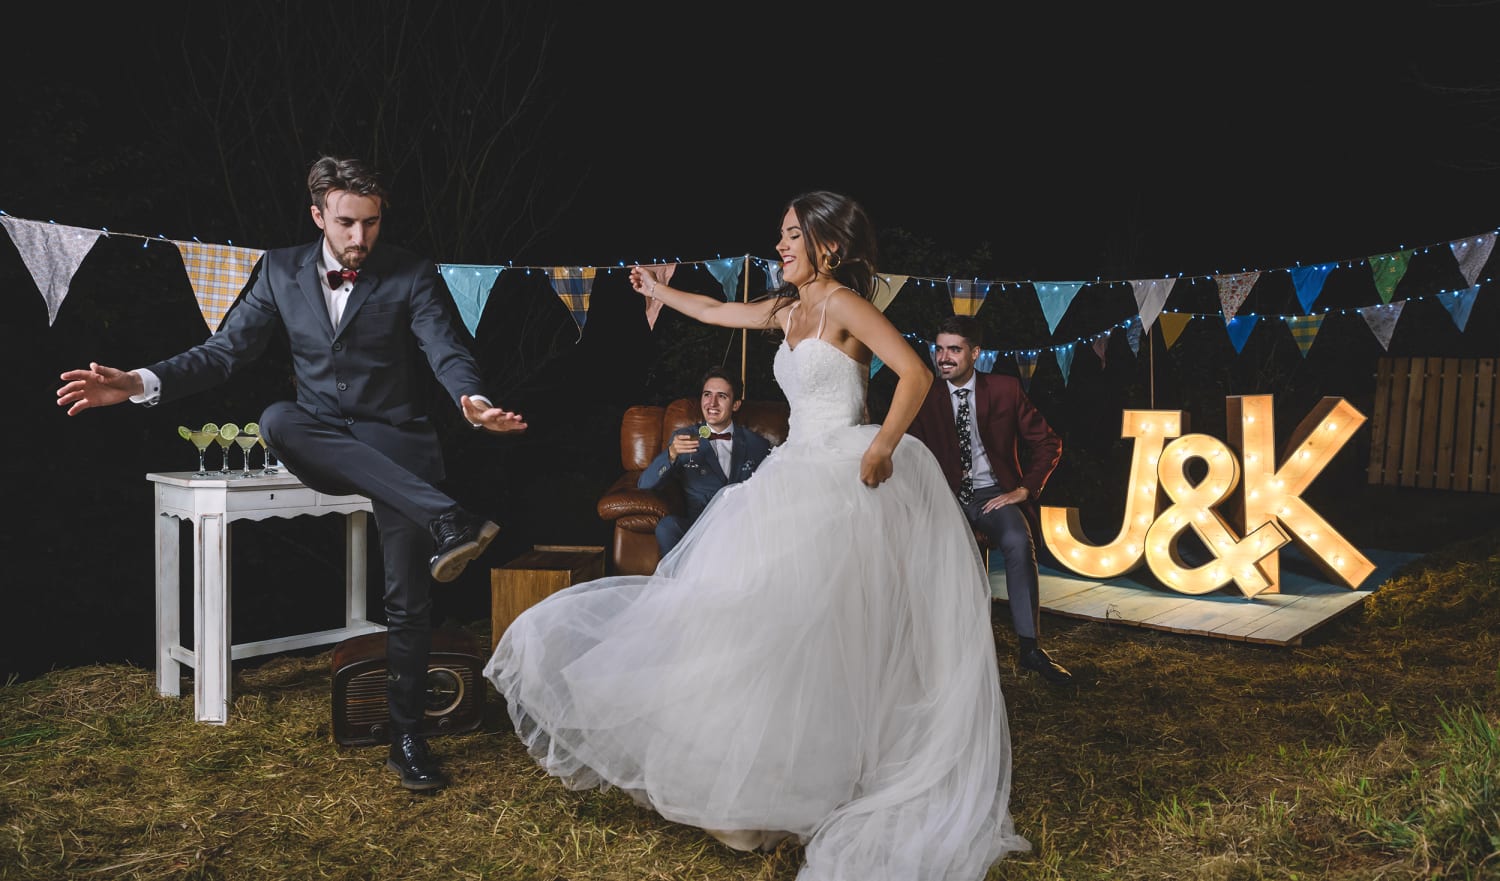 35 Best Wedding Songs to Dance to